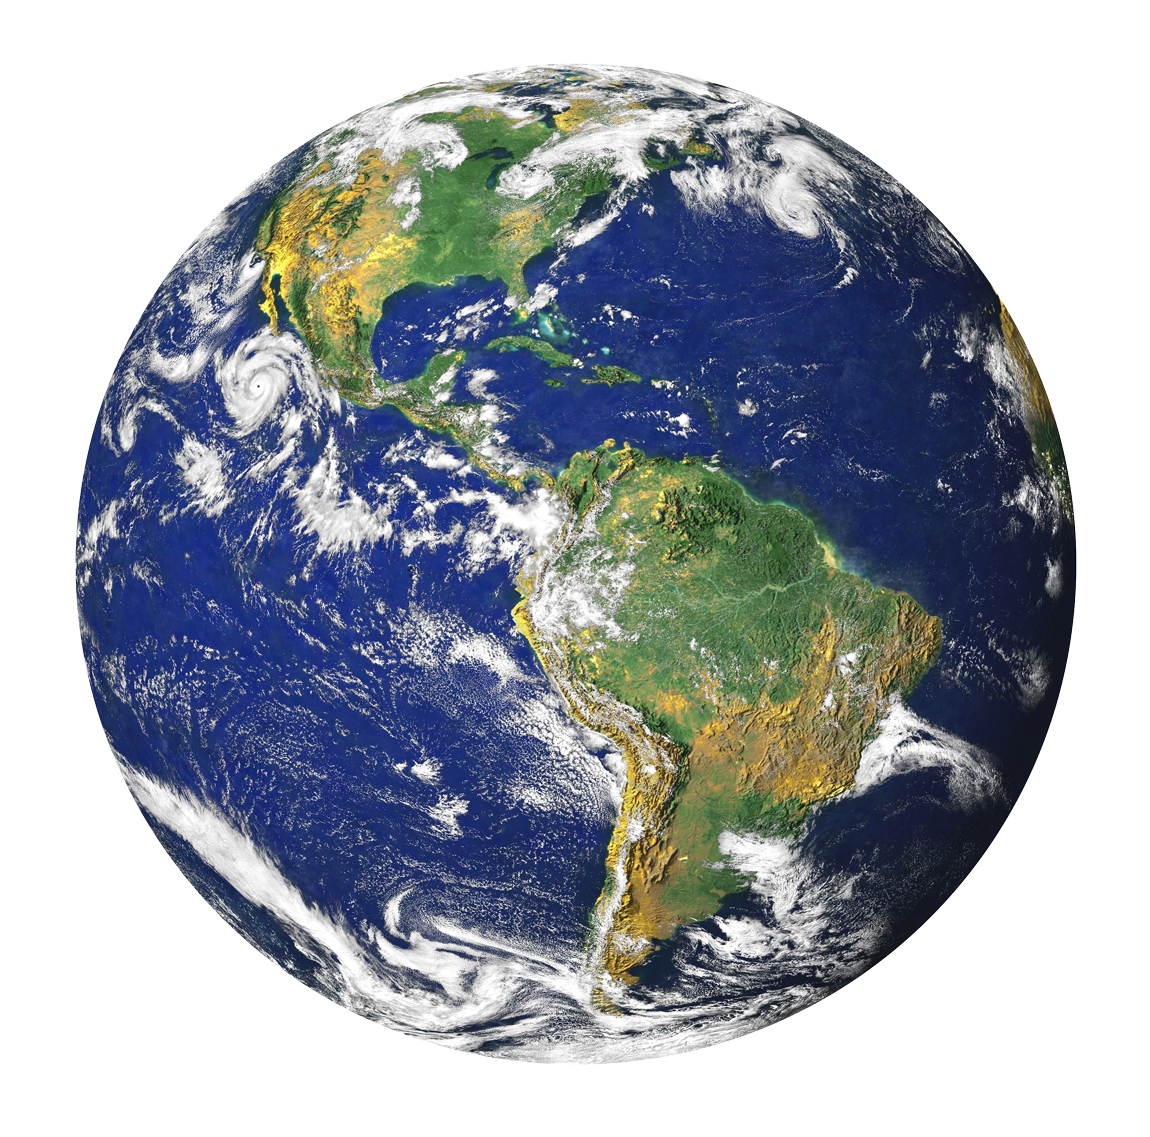 Earth Png Transparent Image - Earth, Transparent background PNG HD thumbnail